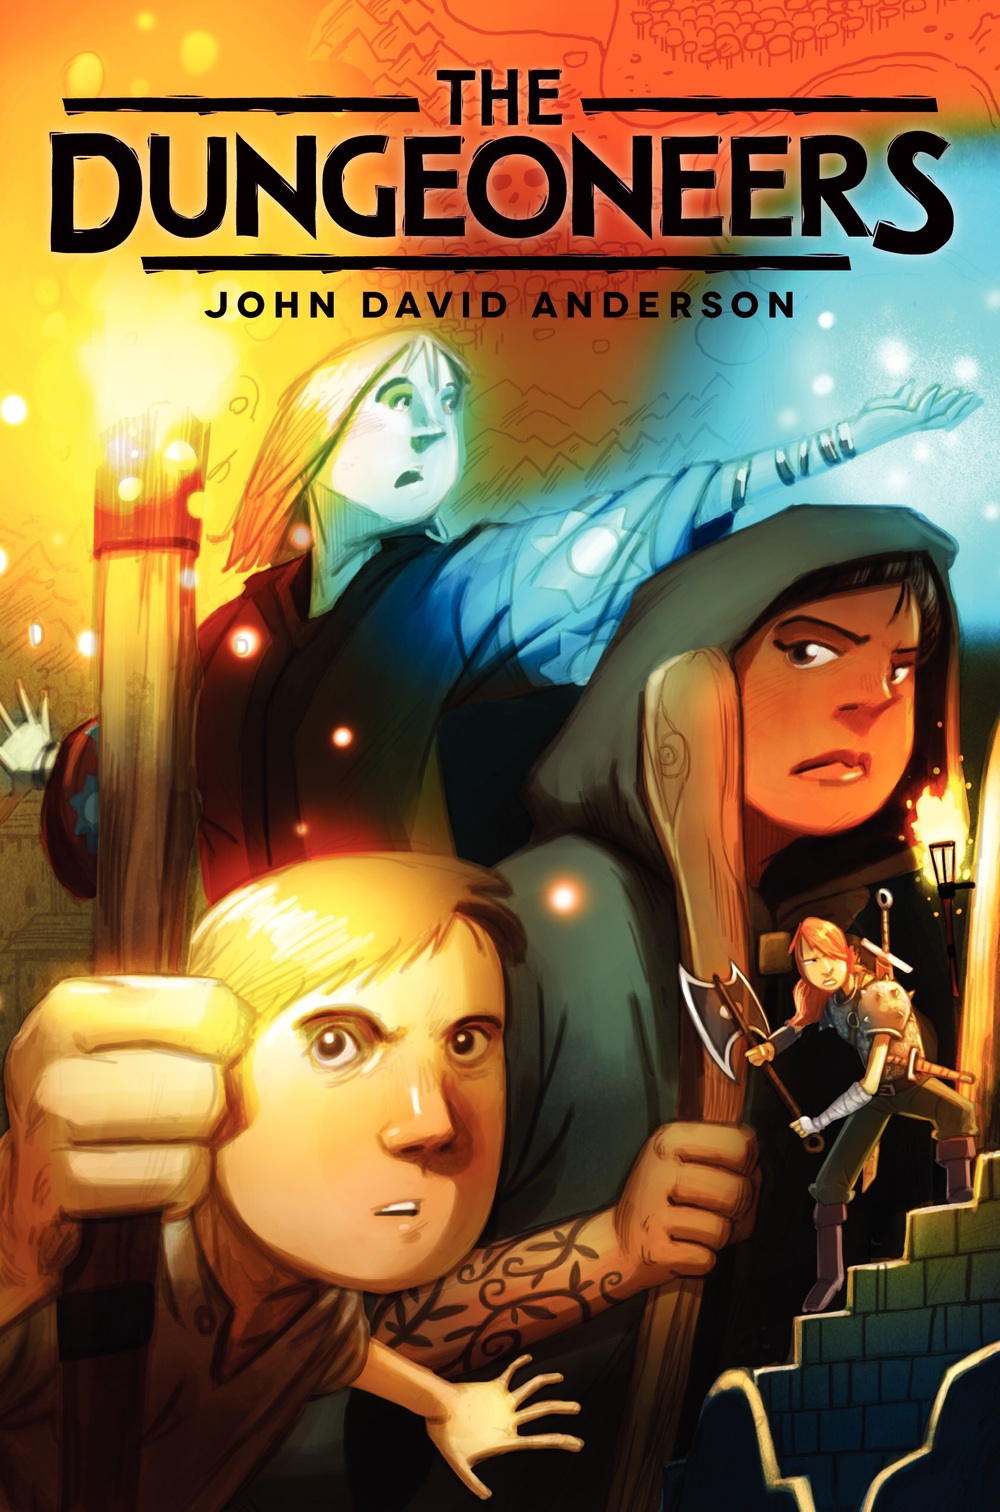 THE DUNGEONEERS by John David Anderson (June 23, 2015 from Walden Pond Press) 